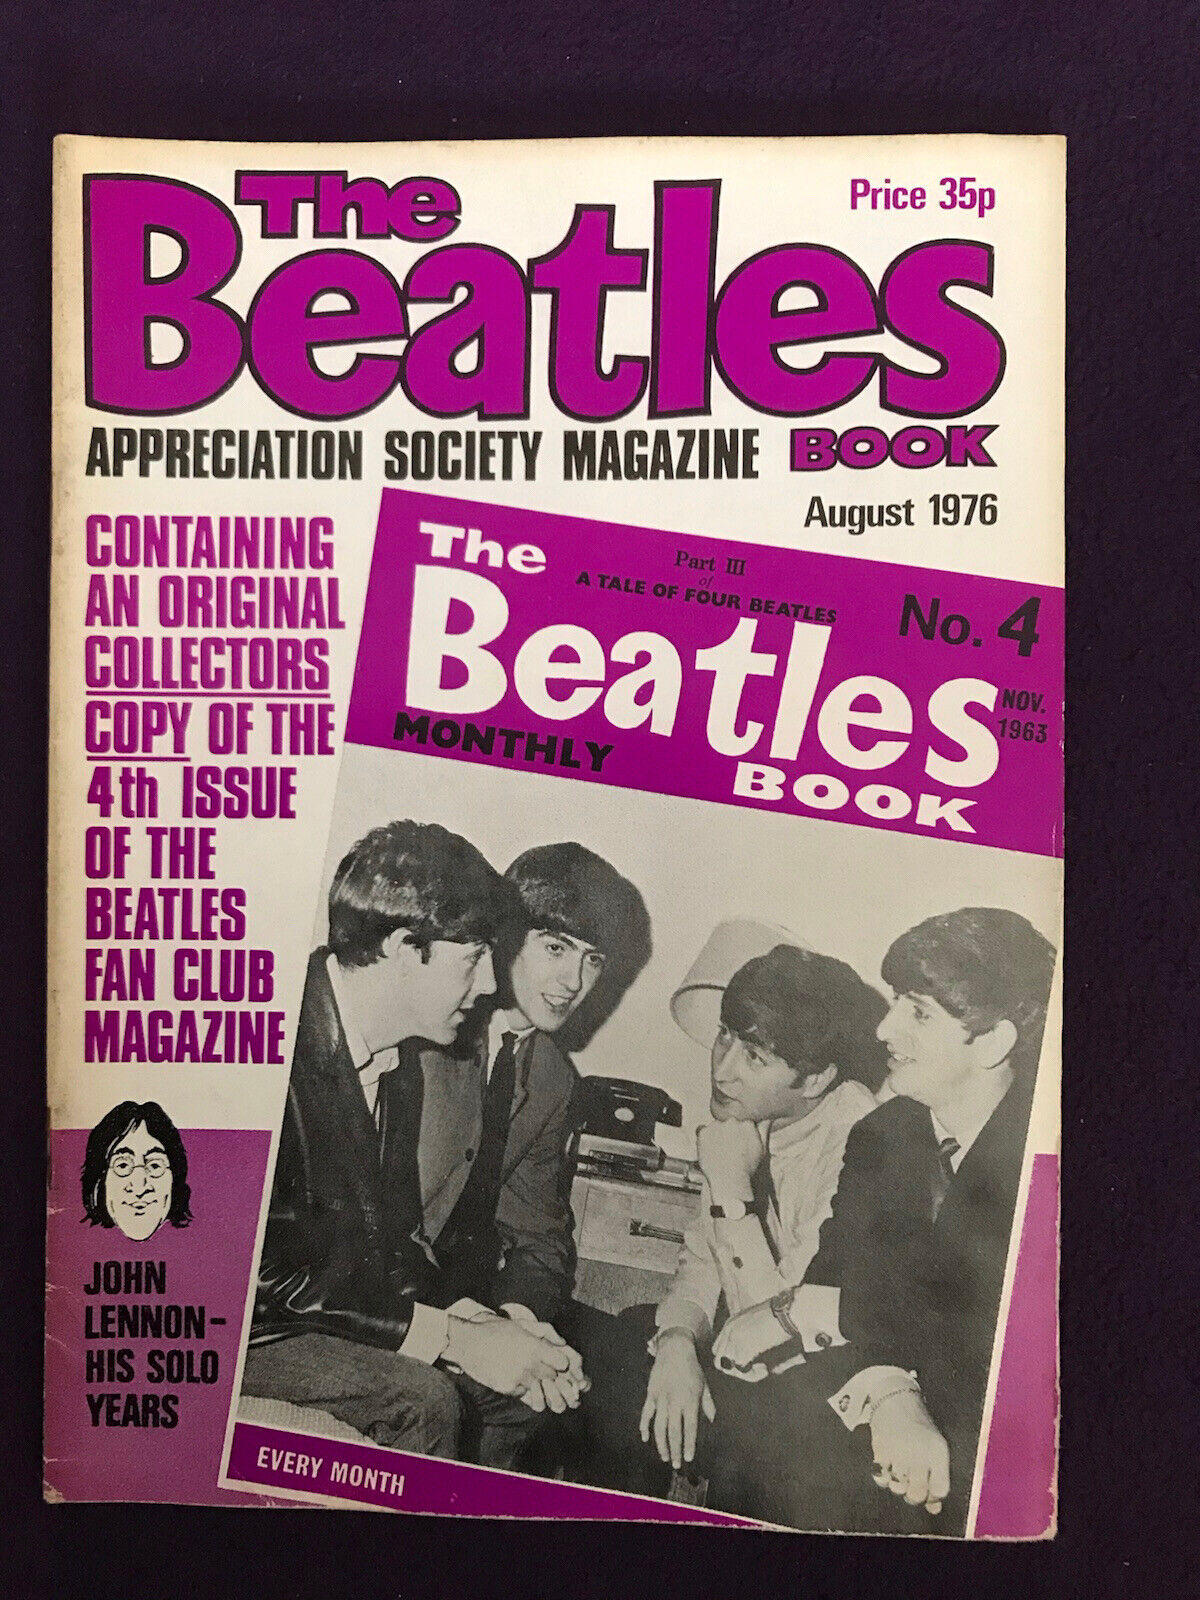 THE BEATLES Max 60% OFF Max 41% OFF BOOK MONTHLY magazine appreciation society REPRINT